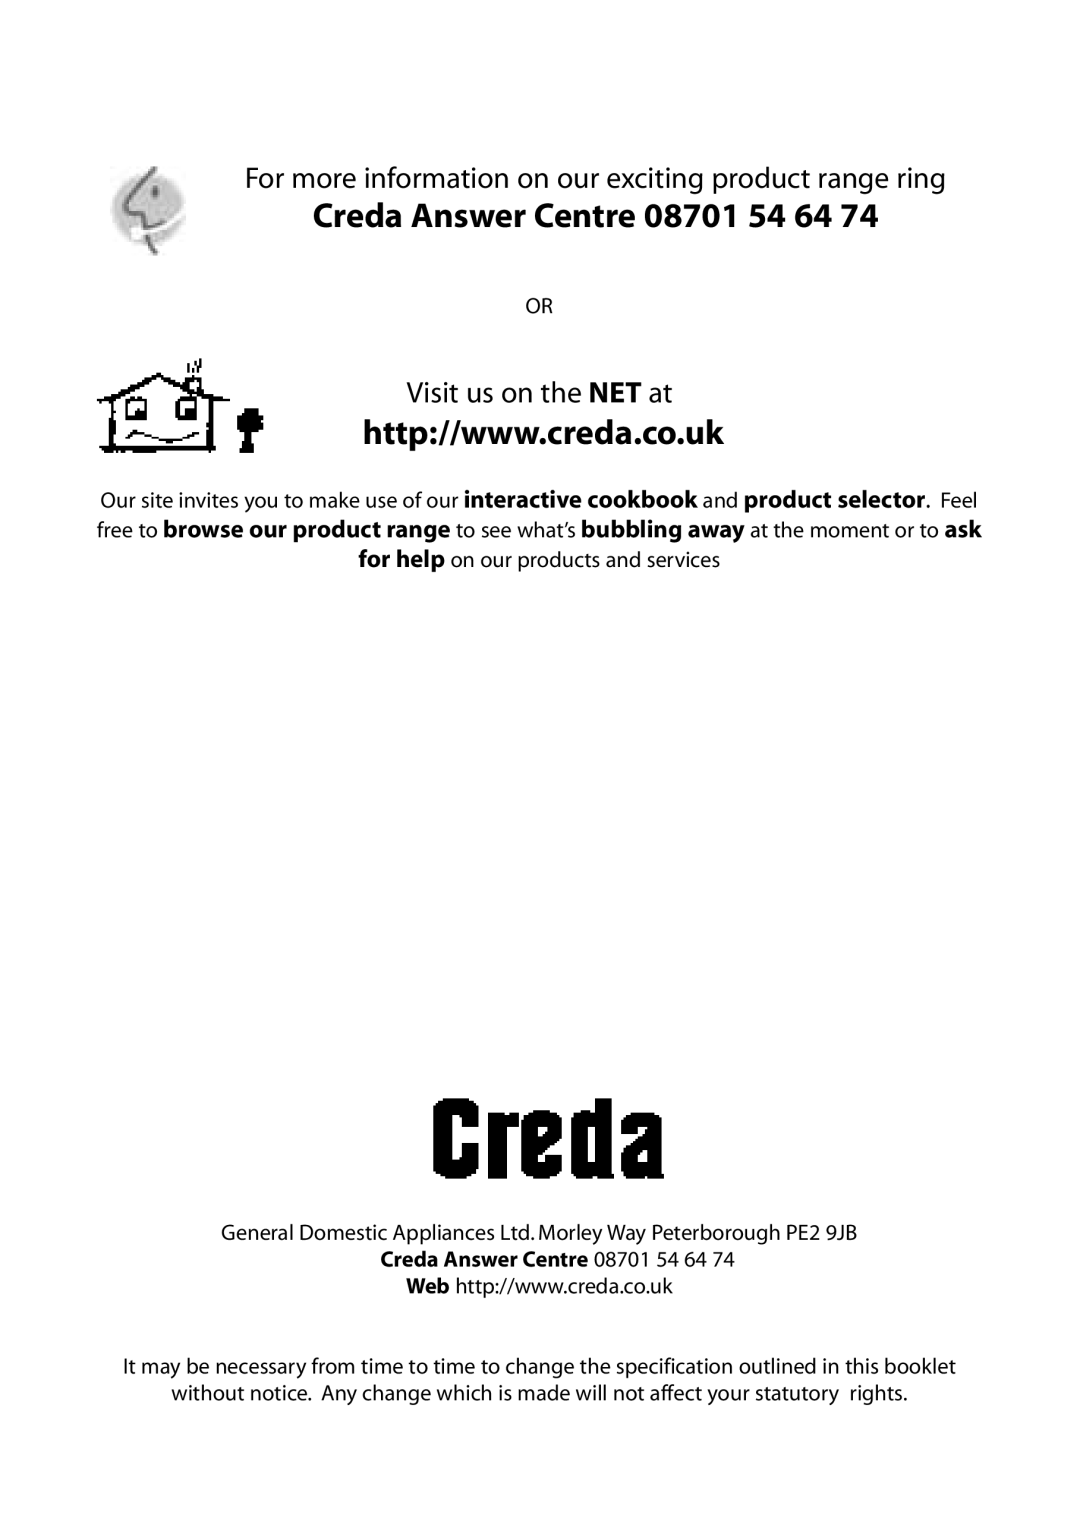 Creda M350E Creda Answer Centre 08701, For more information on our exciting product range ring, Visit us on the NET at 